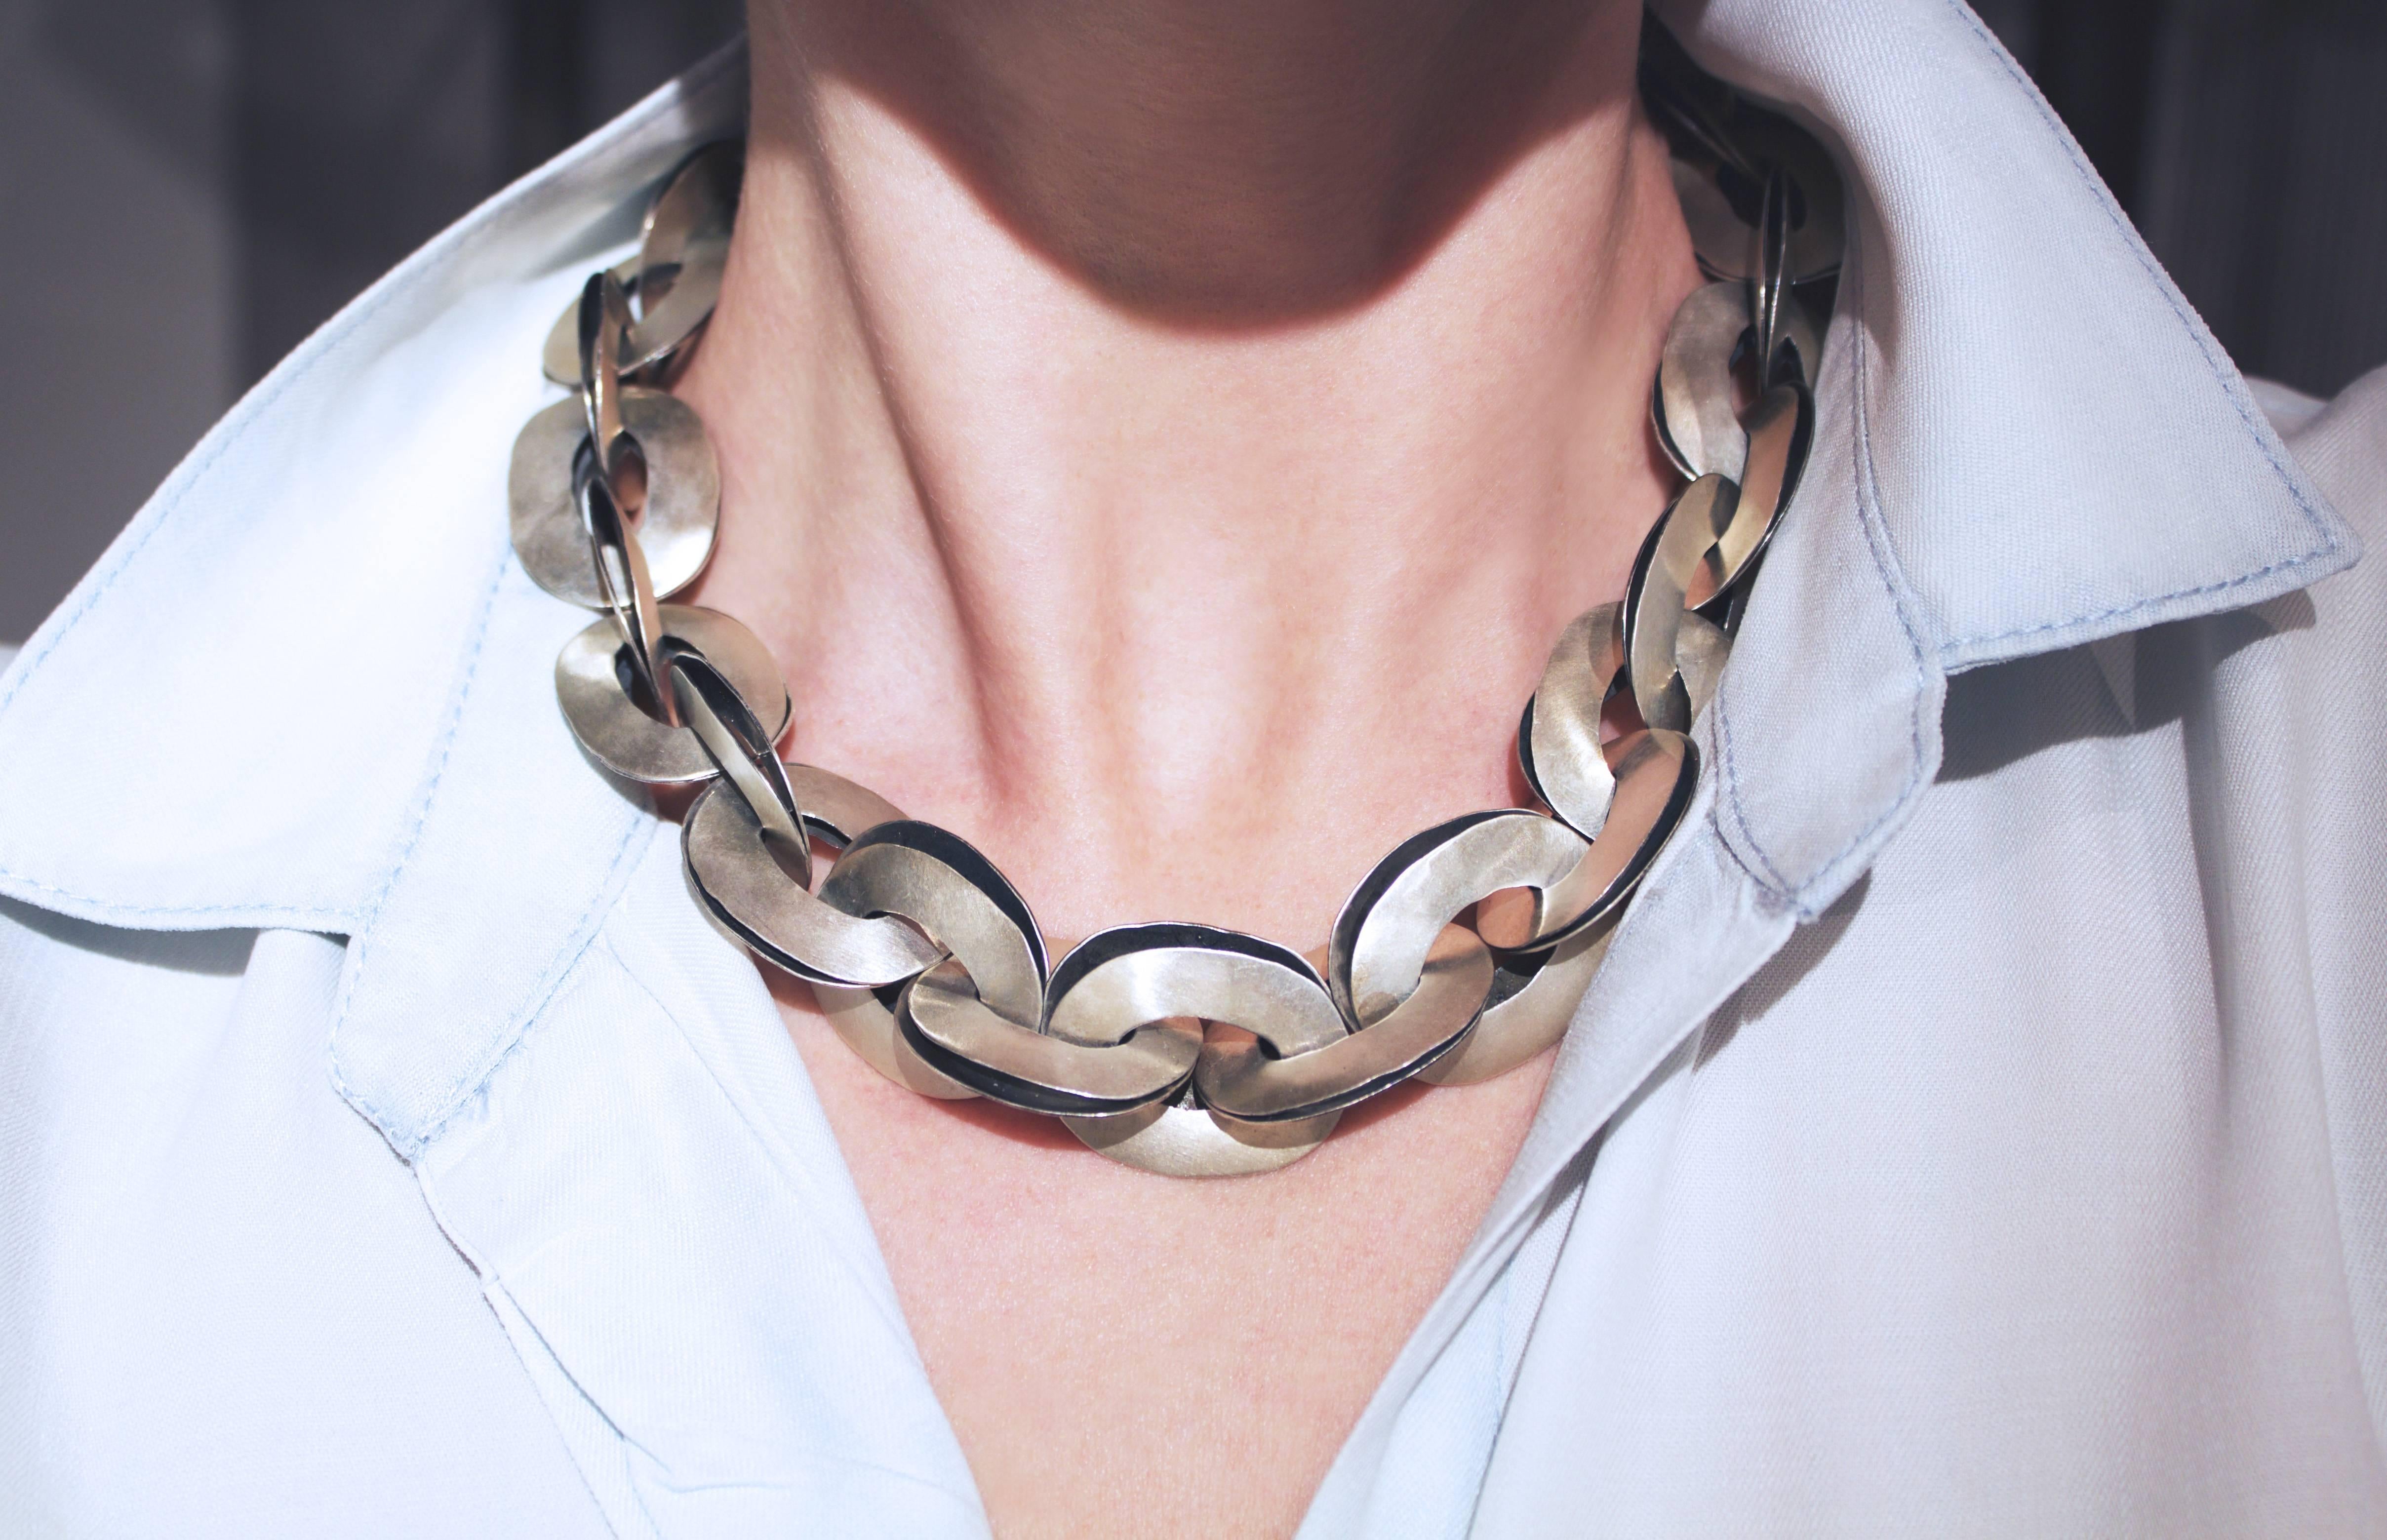 Double Link Chain Necklace handmade by renowned jewelry artist John Iversen, featuring stacked and interlocked double oval link elements designed with a hammered and matte-finished sterling silver exterior complemented by a hammered and